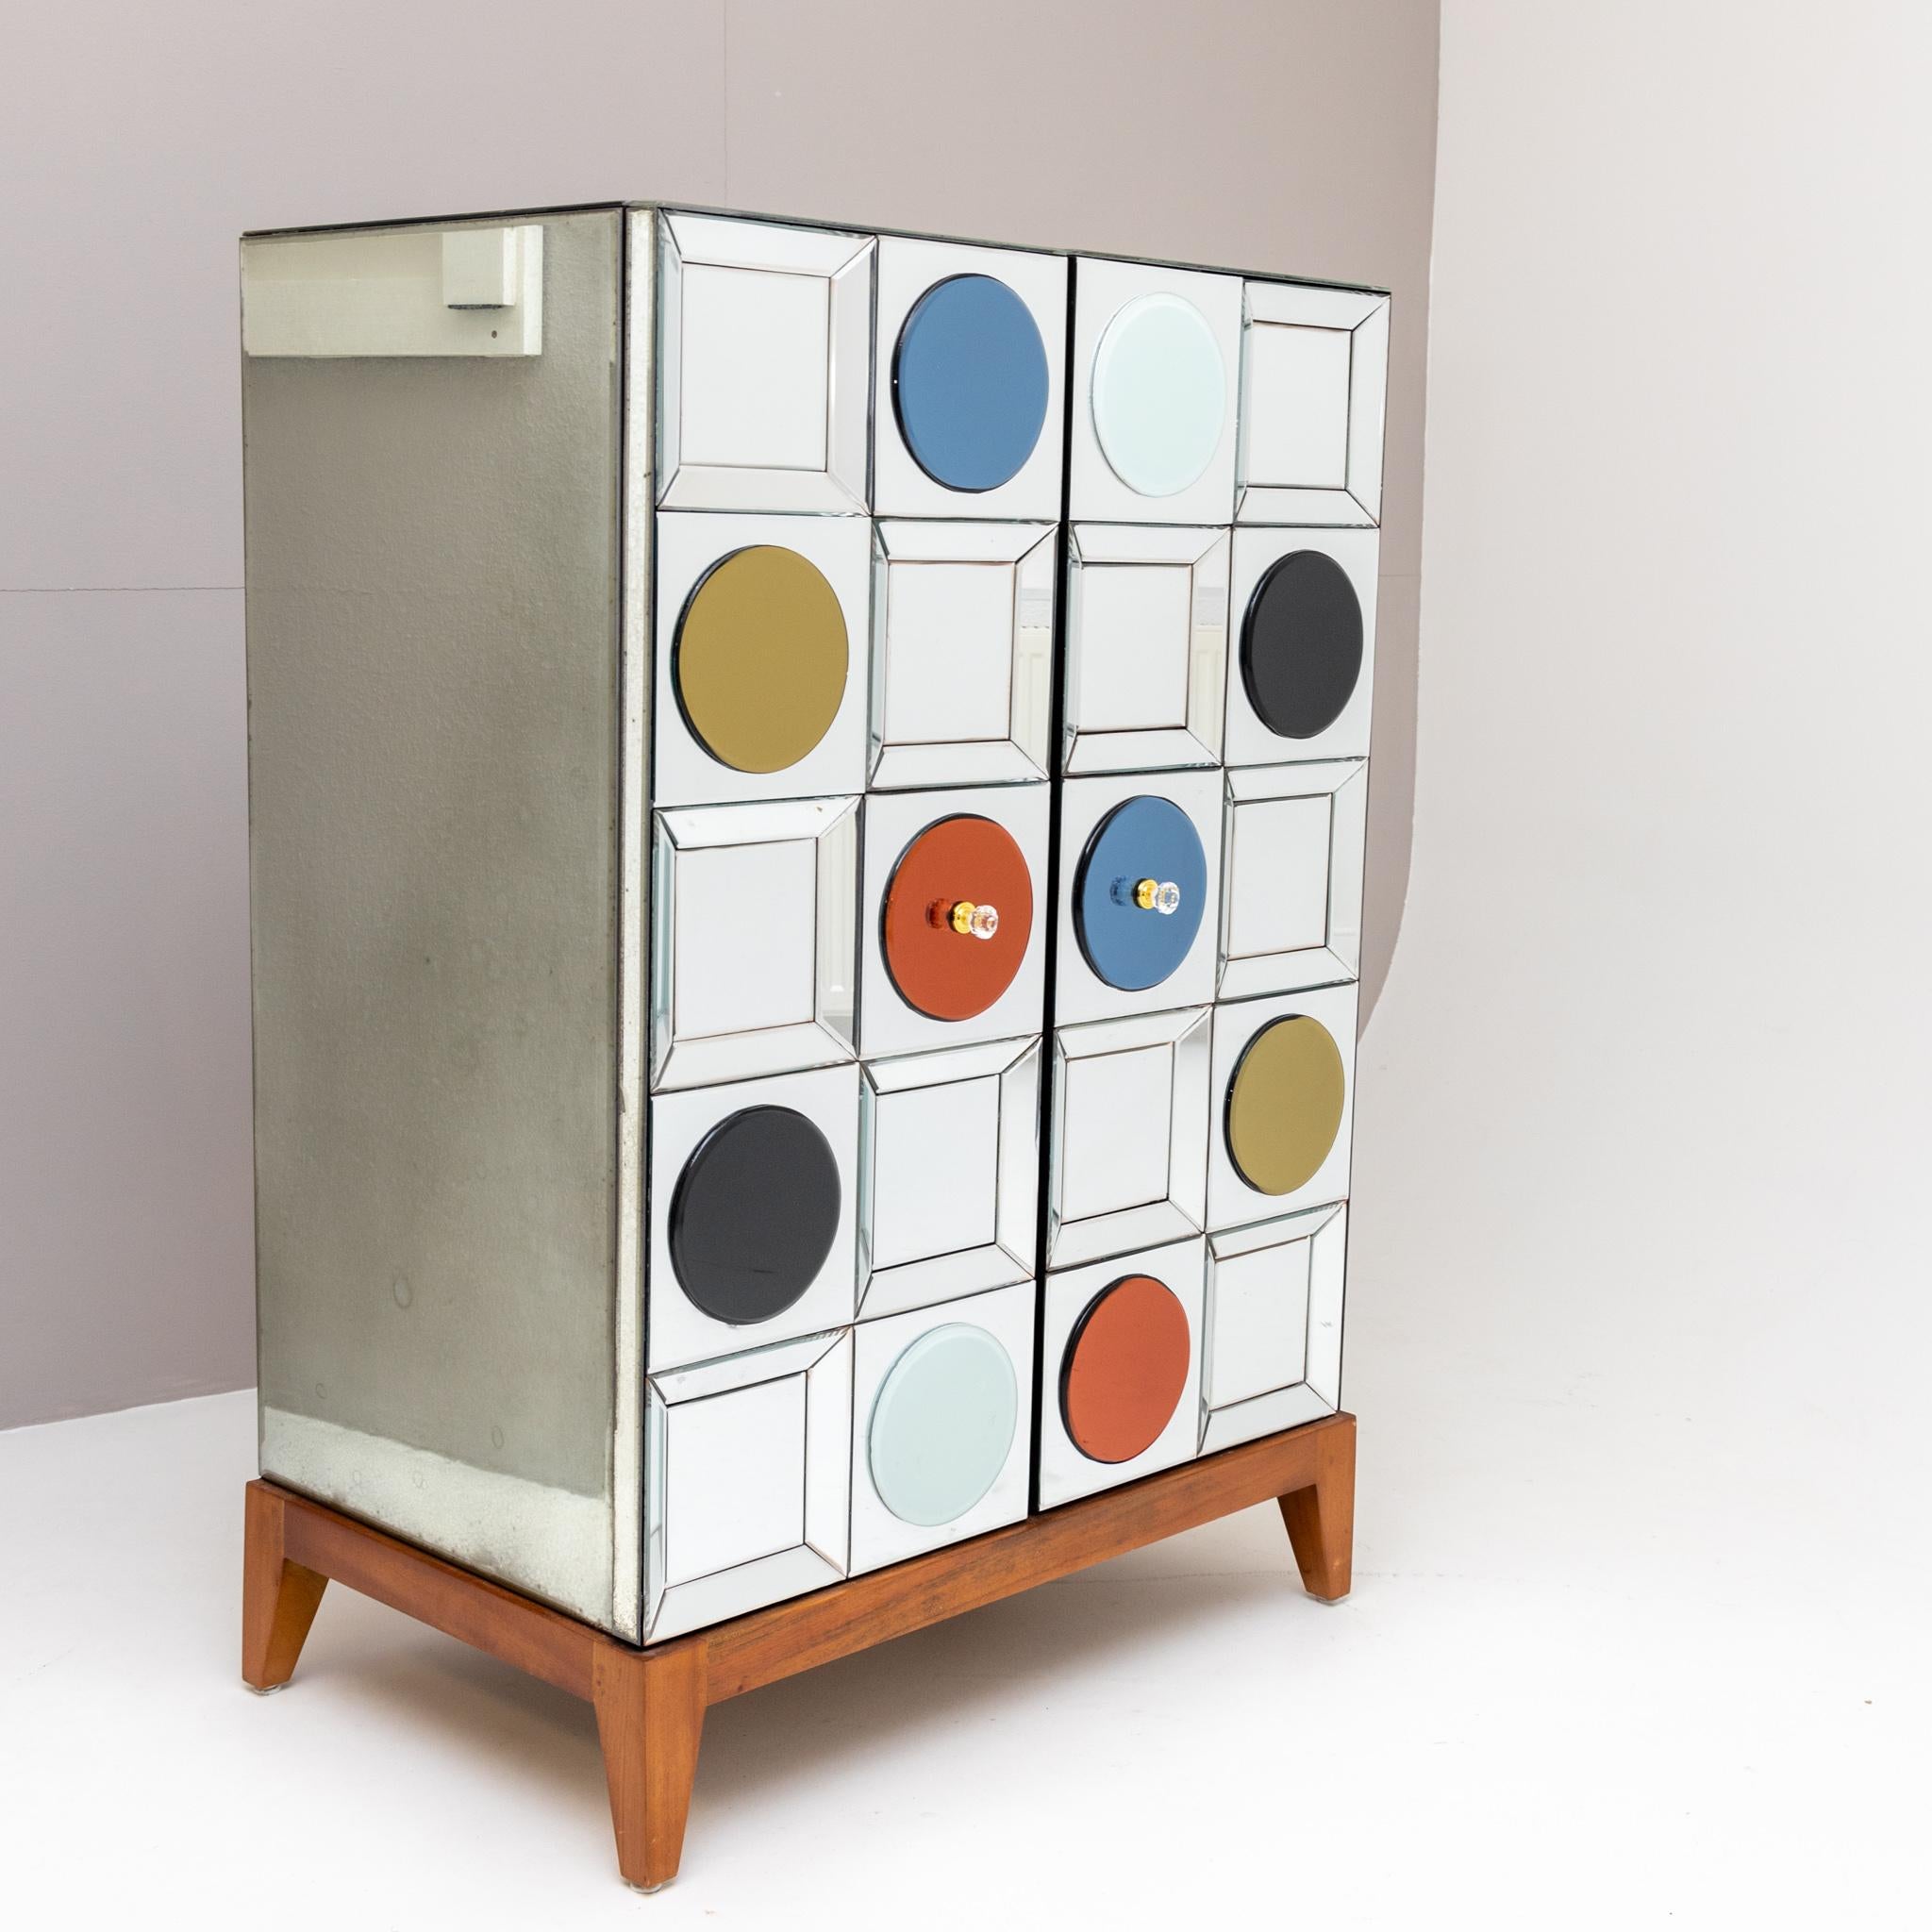 Two-door bar cabinet by Belgian designer Olivier de Schrijver (b. 1958) on wooden frame with mirrored glass surfaces and circular colored panes.